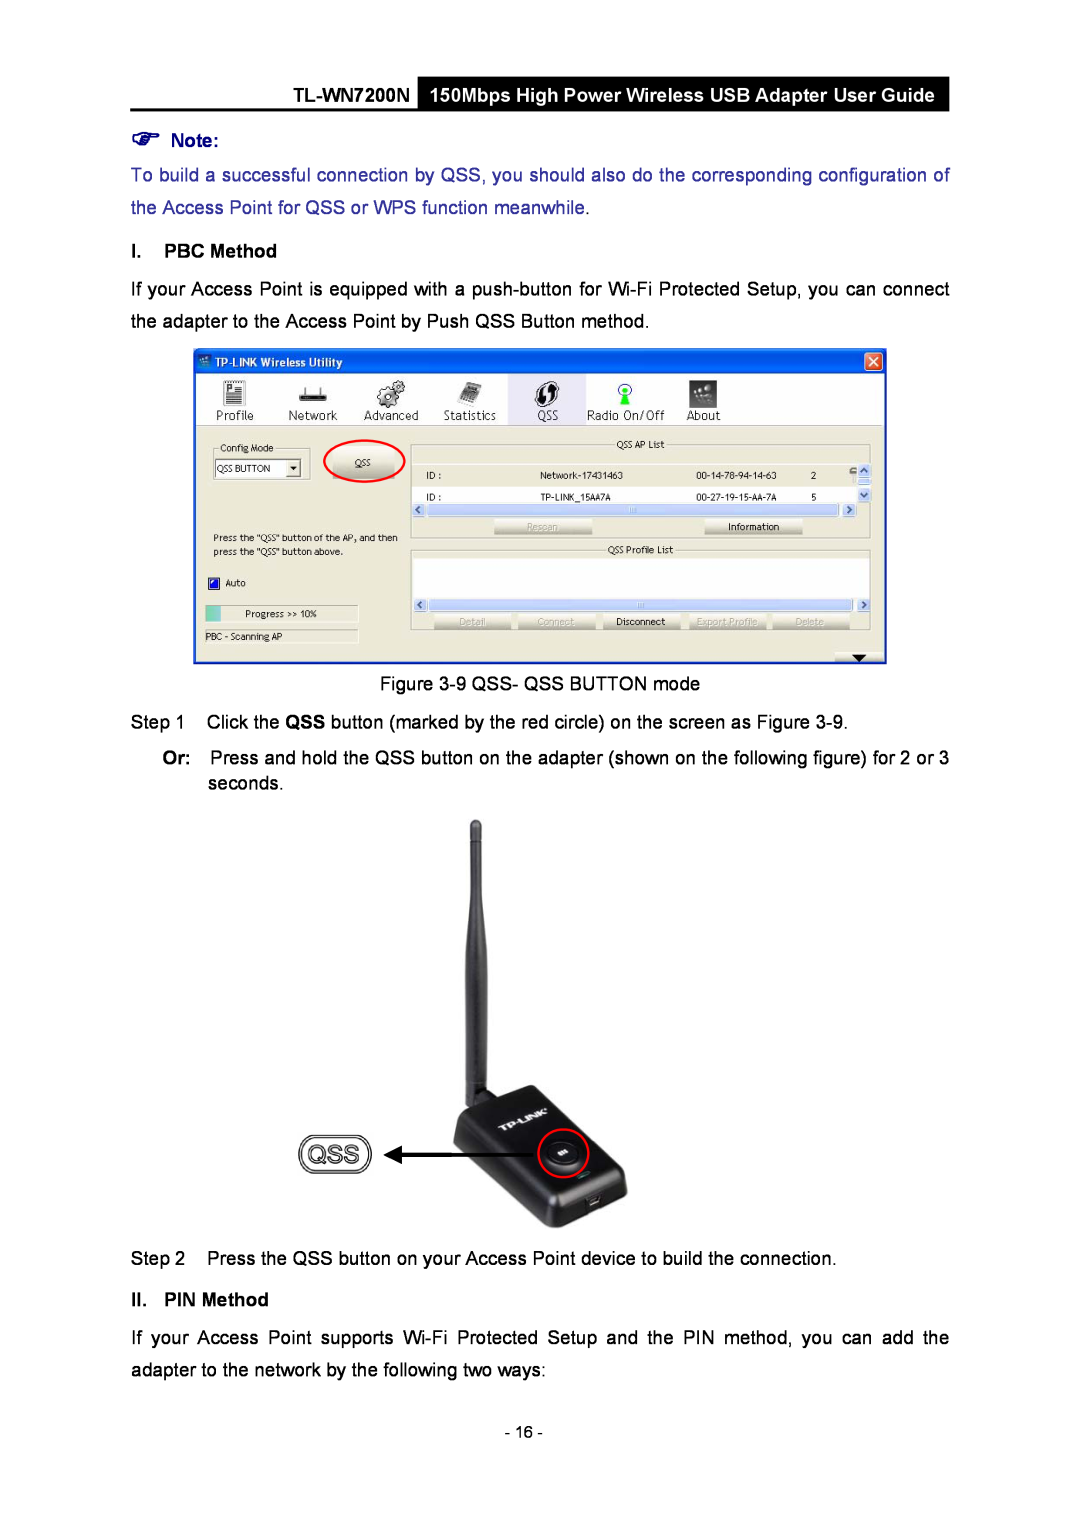 TP-Link manual TL-WN7200N 150Mbps High Power Wireless USB Adapter User Guide, I. PBC Method, II. PIN Method 